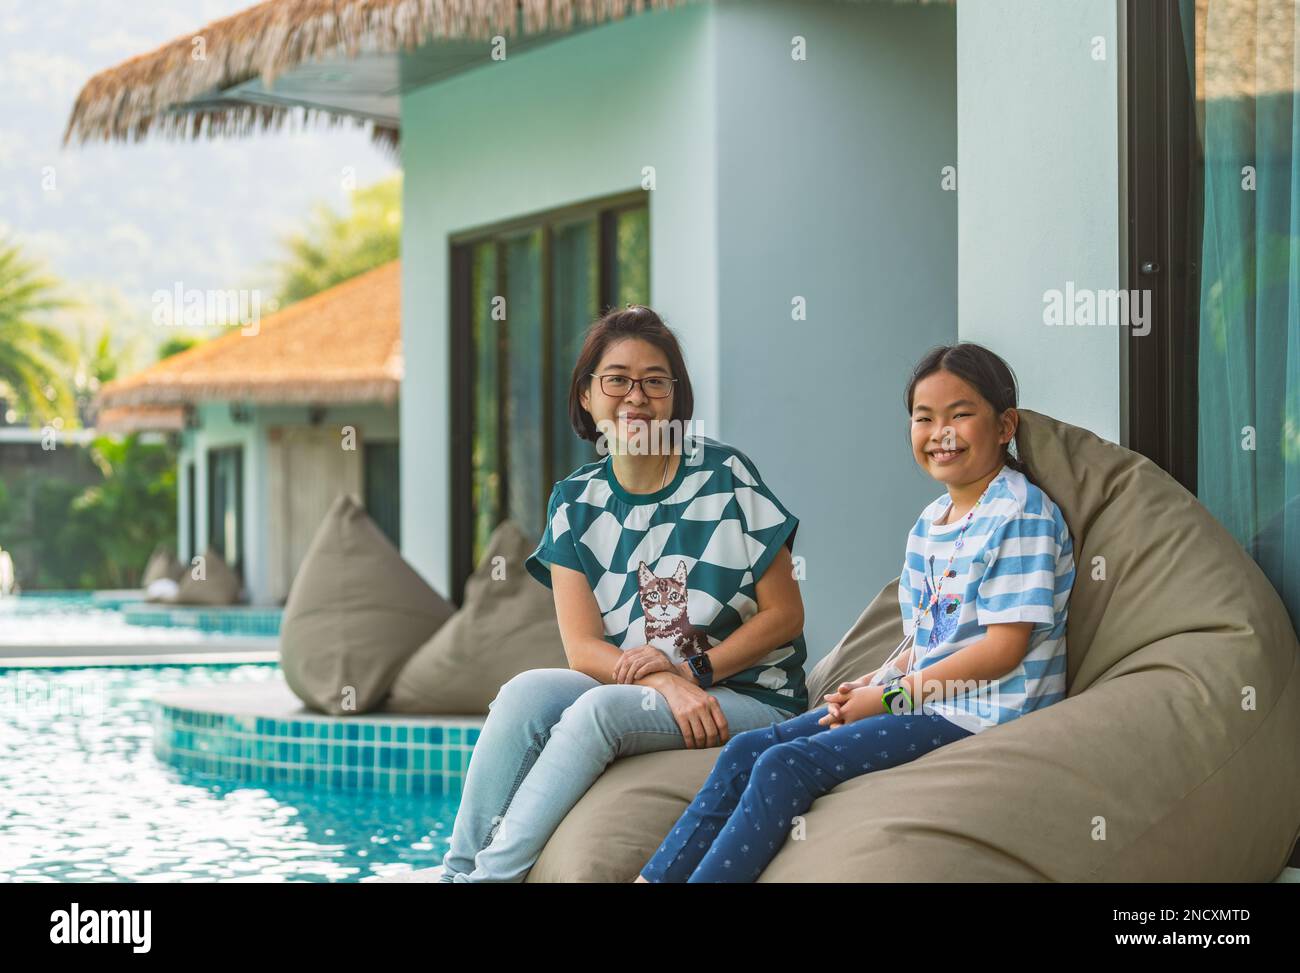 Portrait Asian mother and daughter are sitting on a beanbag at the poolside of a resort, a middle-aged woman and child girl at 8 or 9 years old. Stock Photo